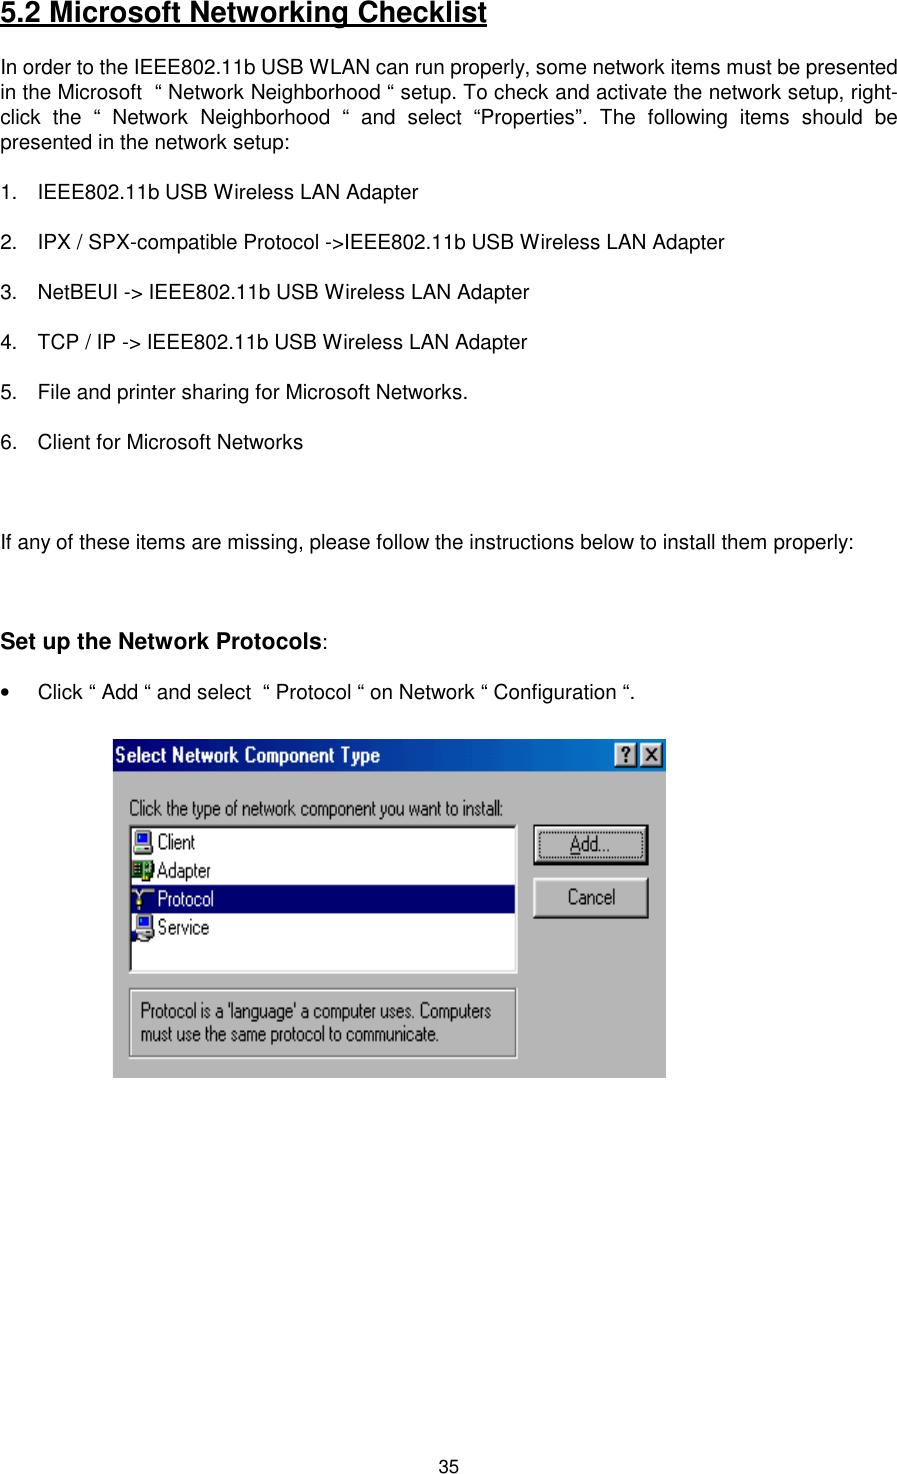 355.2 Microsoft Networking ChecklistIn order to the IEEE802.11b USB WLAN can run properly, some network items must be presentedin the Microsoft  “ Network Neighborhood “ setup. To check and activate the network setup, right-click the “ Network Neighborhood “ and select “Properties”. The following items should bepresented in the network setup:1.  IEEE802.11b USB Wireless LAN Adapter2.  IPX / SPX-compatible Protocol -&gt;IEEE802.11b USB Wireless LAN Adapter3.  NetBEUI -&gt; IEEE802.11b USB Wireless LAN Adapter4.  TCP / IP -&gt; IEEE802.11b USB Wireless LAN Adapter5.  File and printer sharing for Microsoft Networks.6.  Client for Microsoft NetworksIf any of these items are missing, please follow the instructions below to install them properly:Set up the Network Protocols:•  Click “ Add “ and select  “ Protocol “ on Network “ Configuration “.